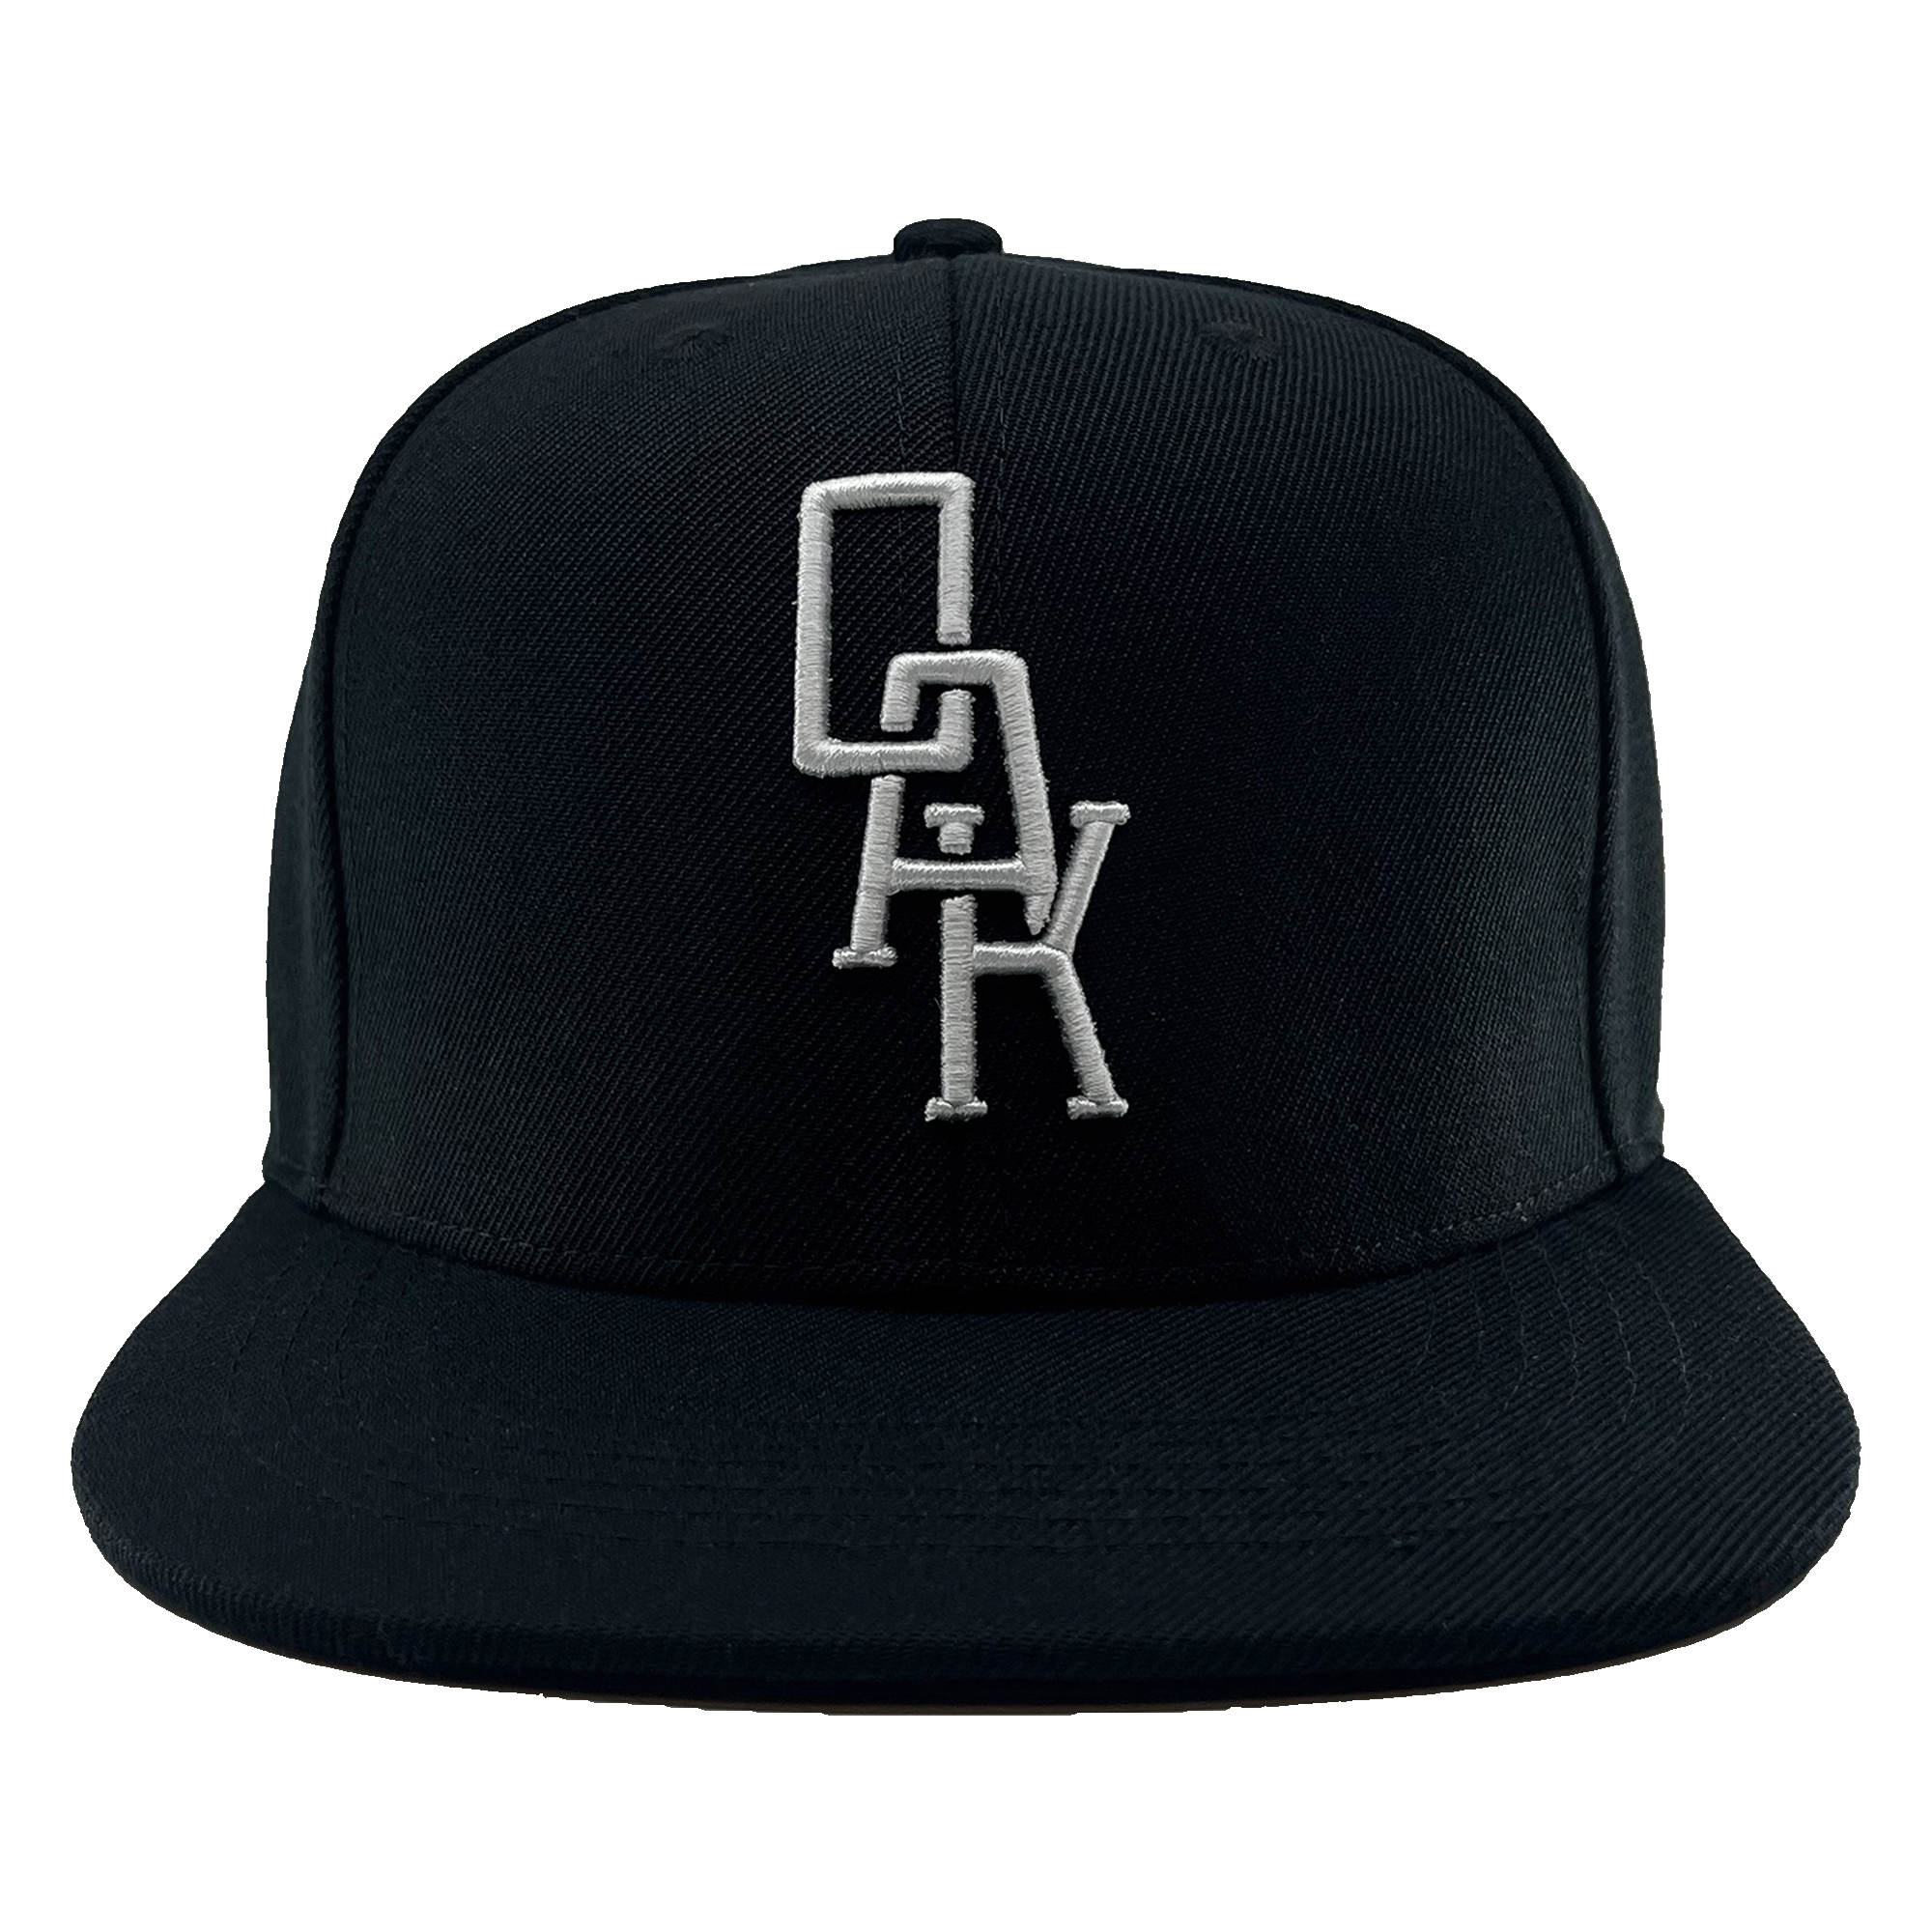 Front view of a black hat with a black bill and white embroidered OAK logo on the front crown.